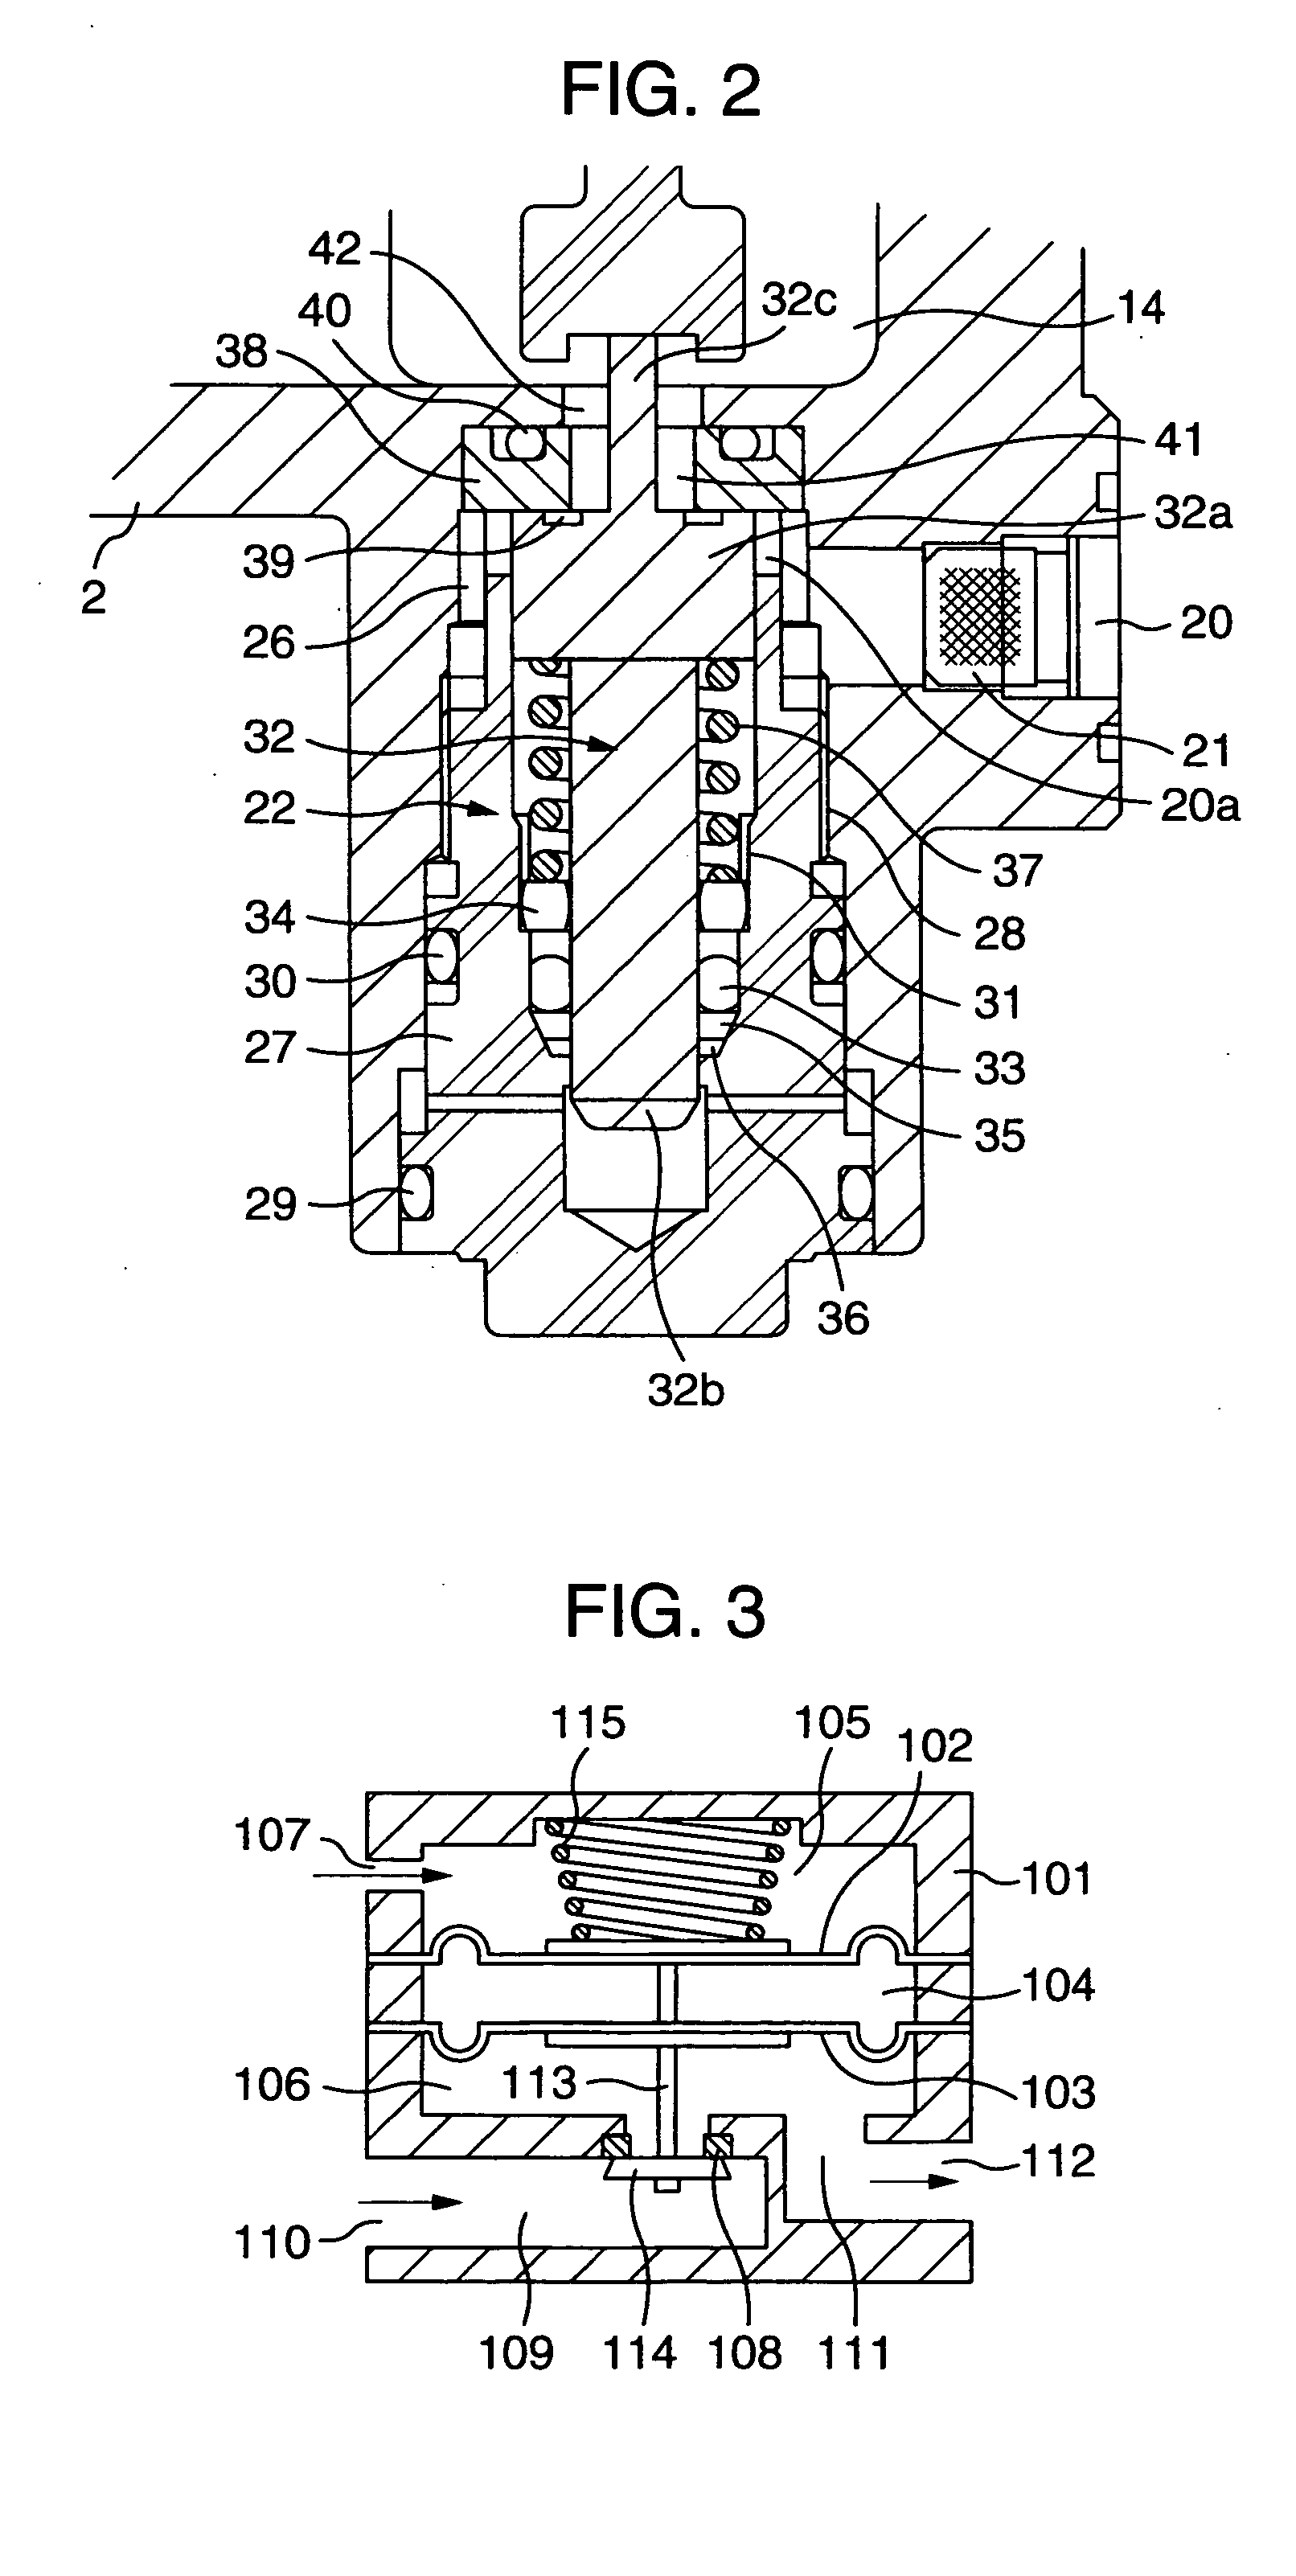 Regulator for fuel cell systems